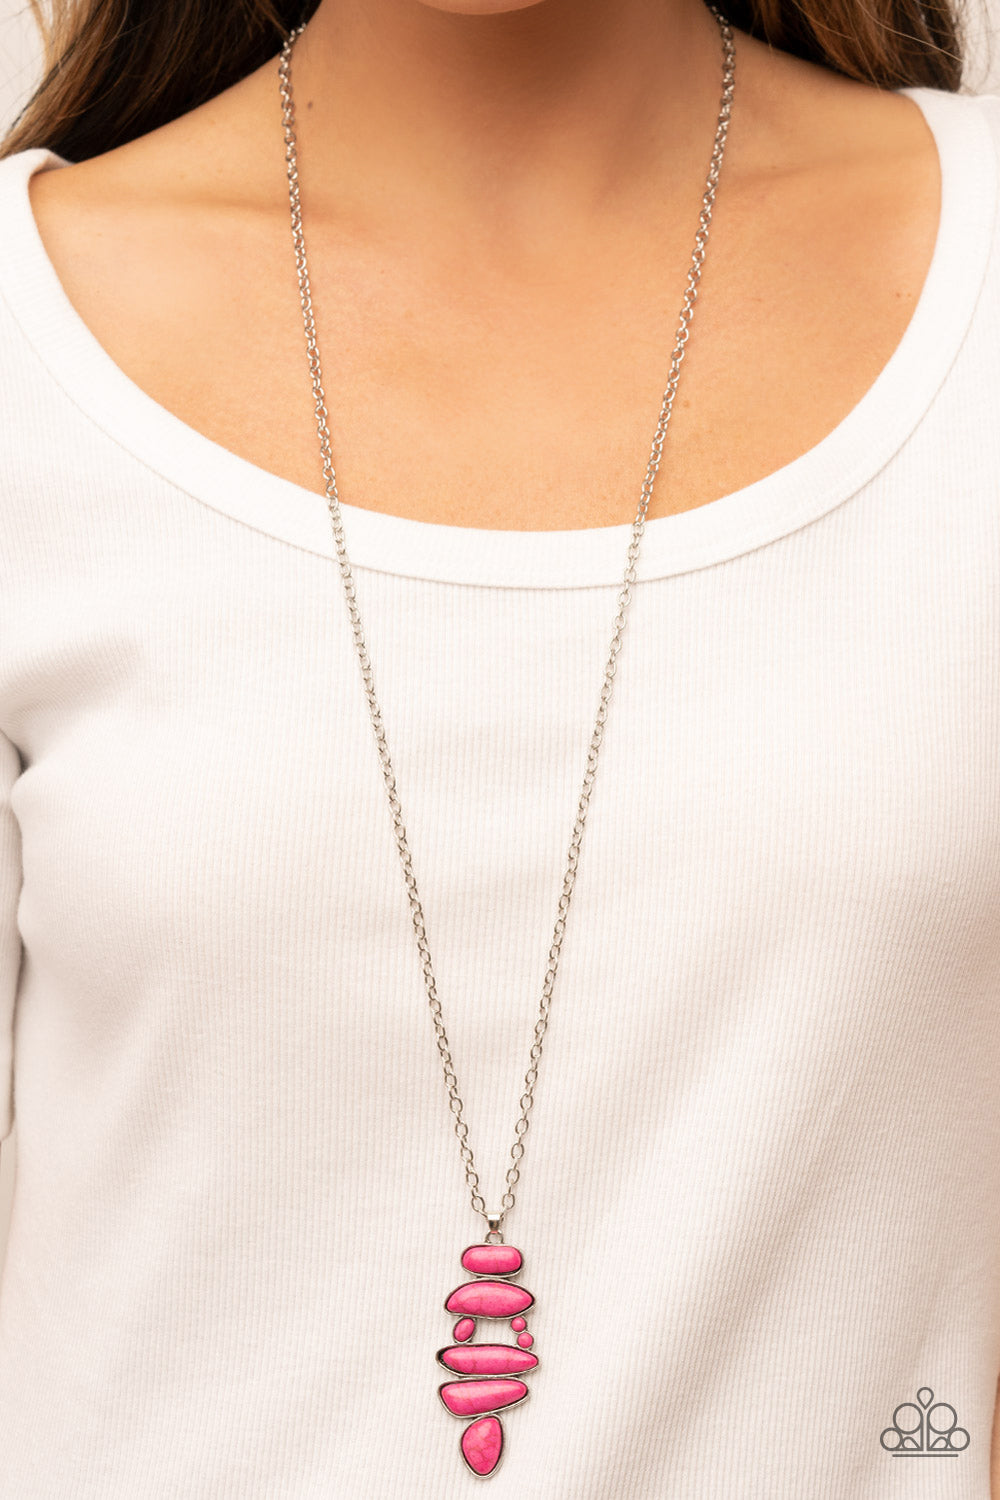 Mojave Mountaineer - Pink Stone Silver Long Necklace